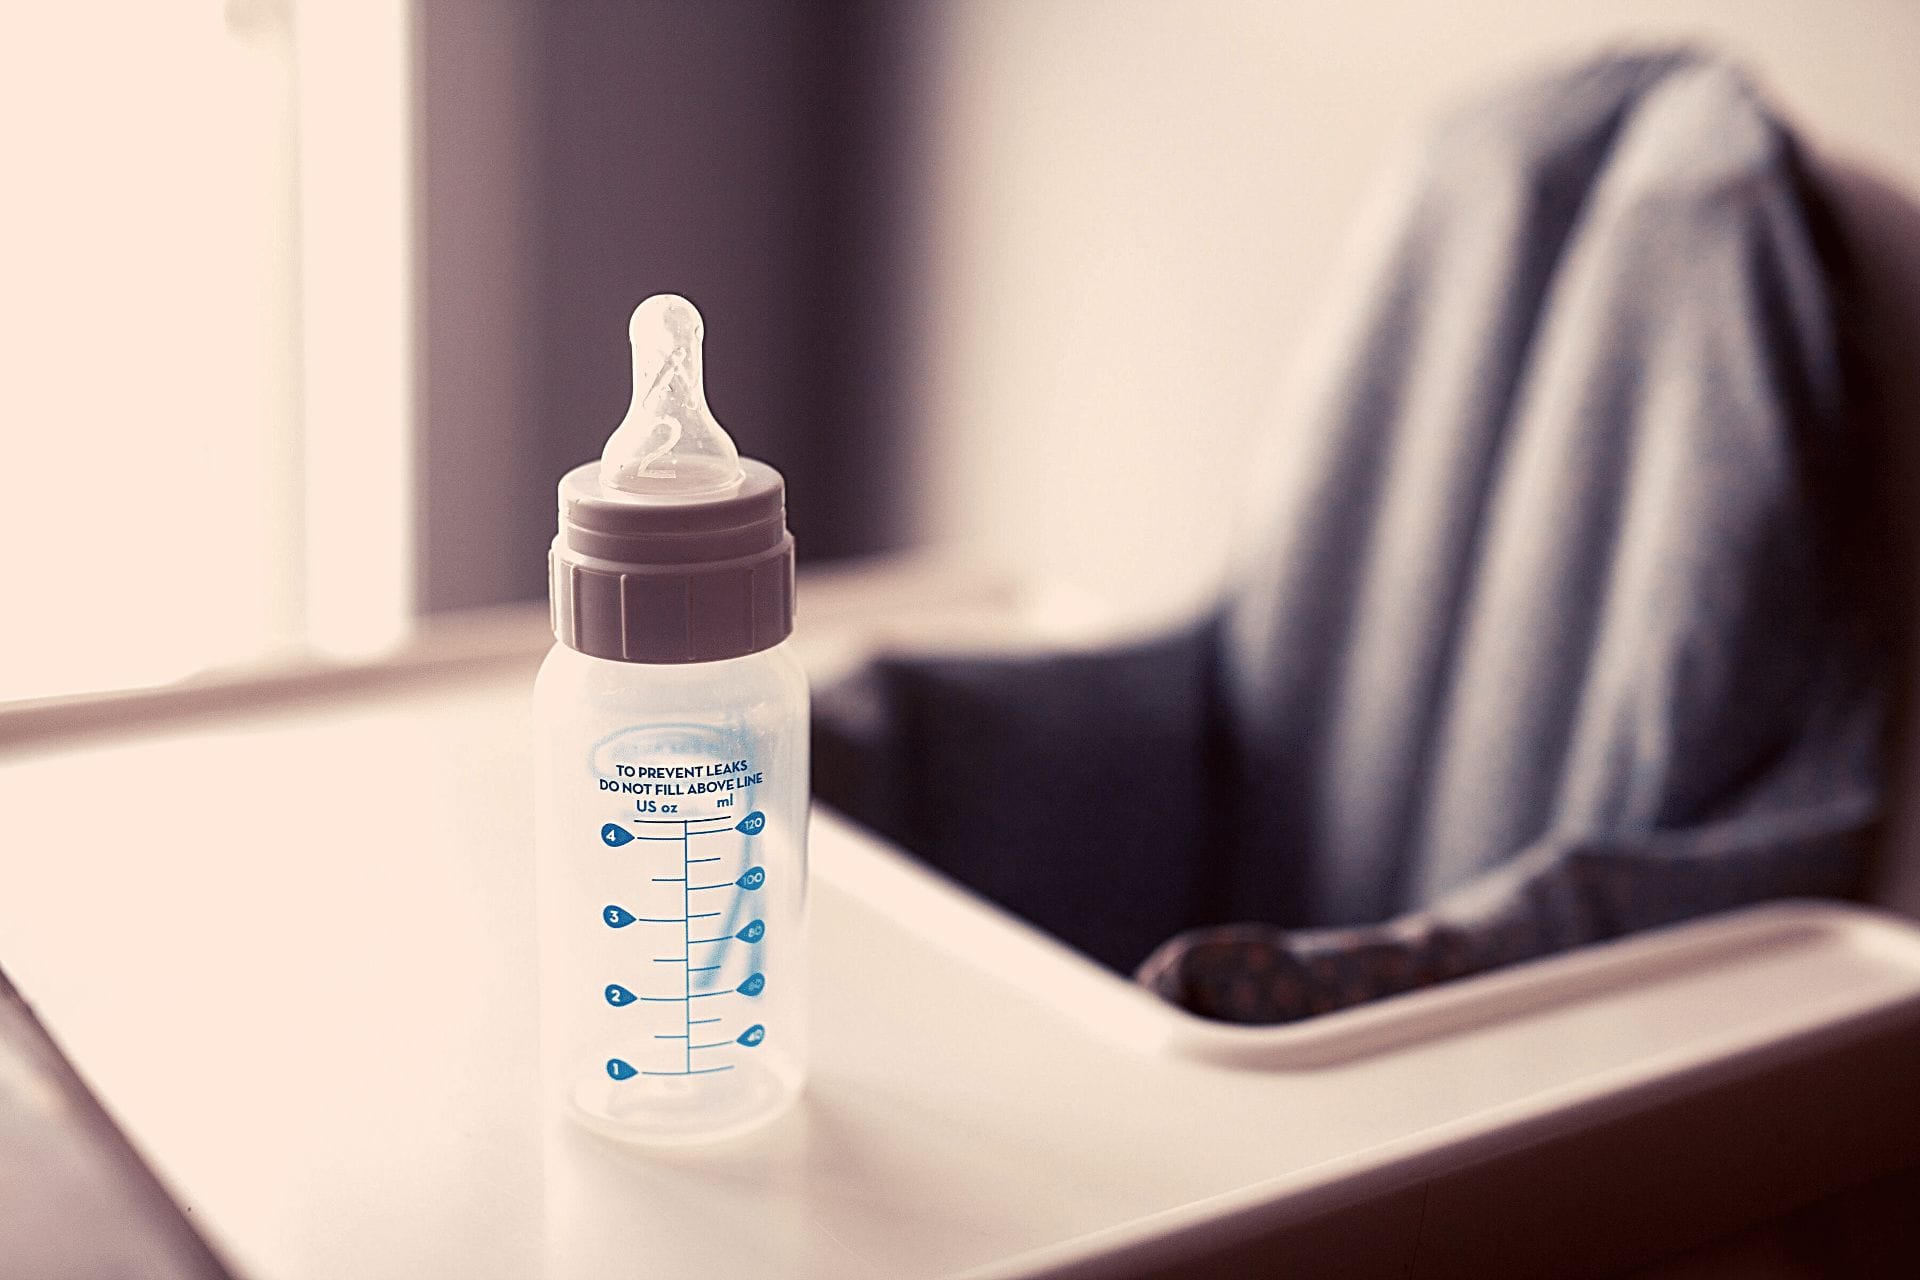 Weaning your teen off the water bottle